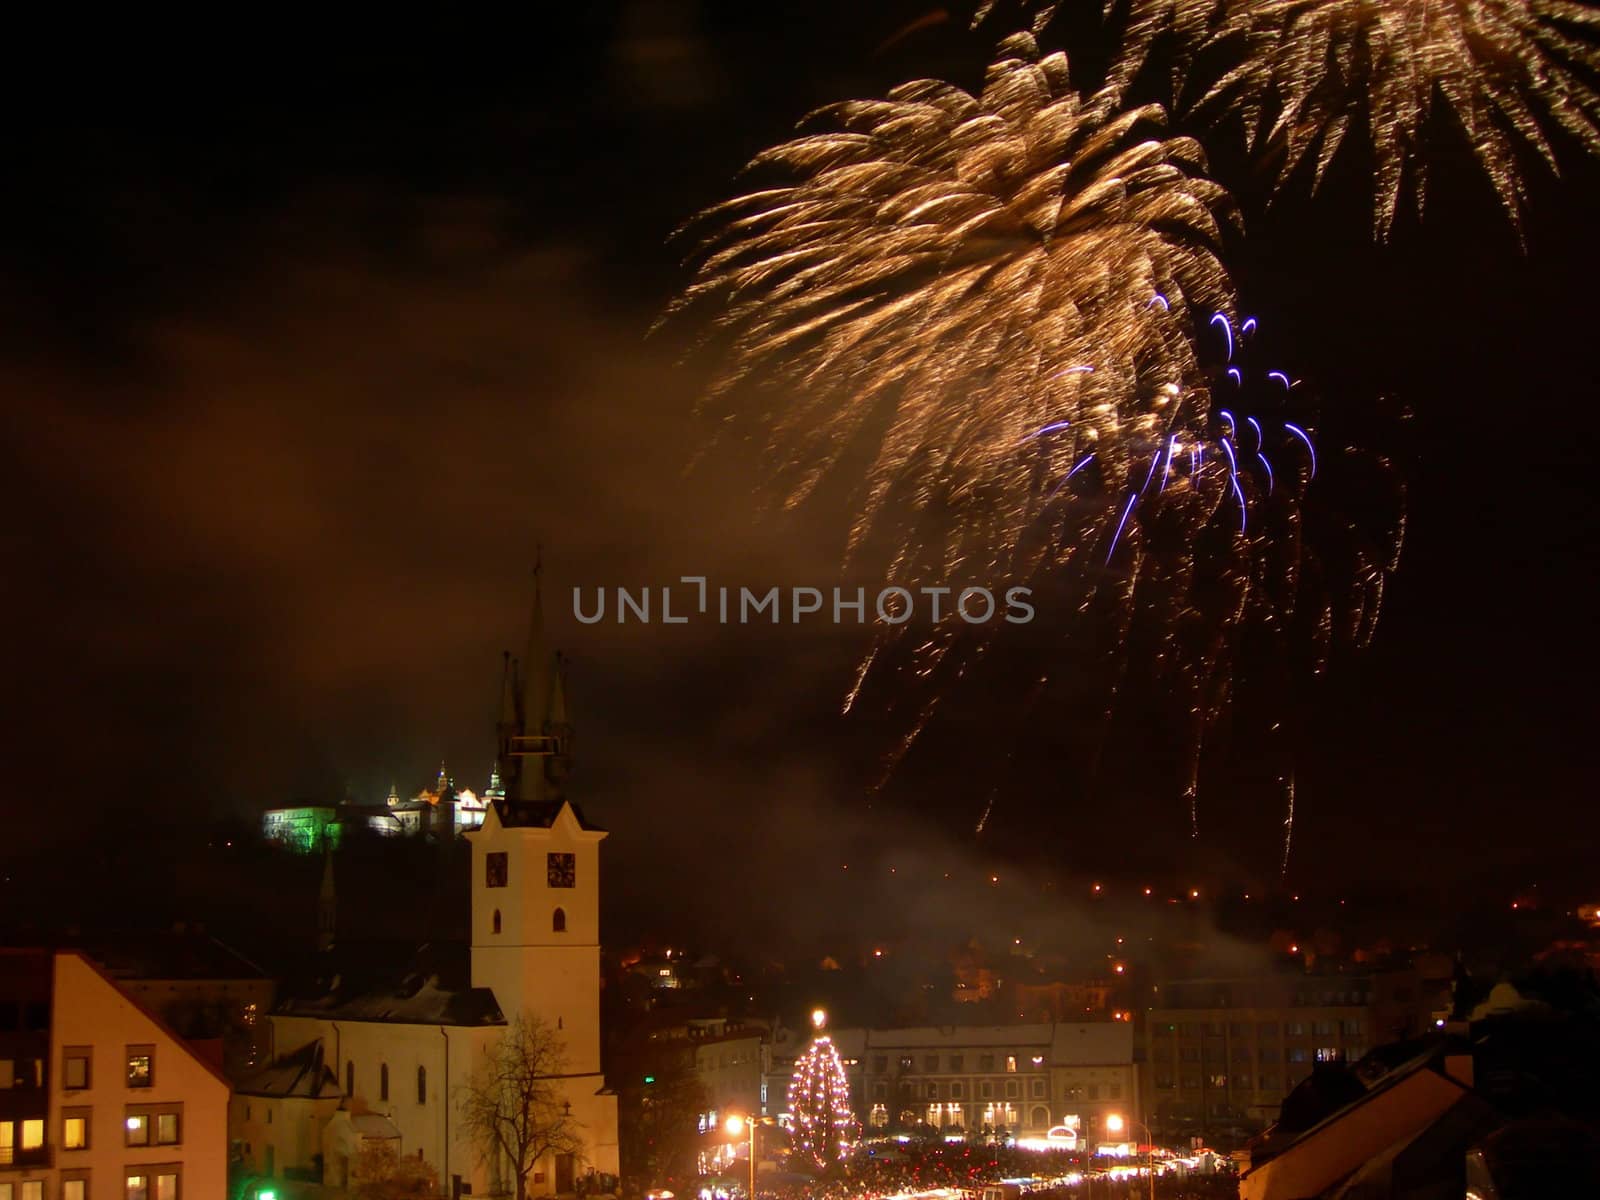  New year celebration with fireworks in the centre of town           